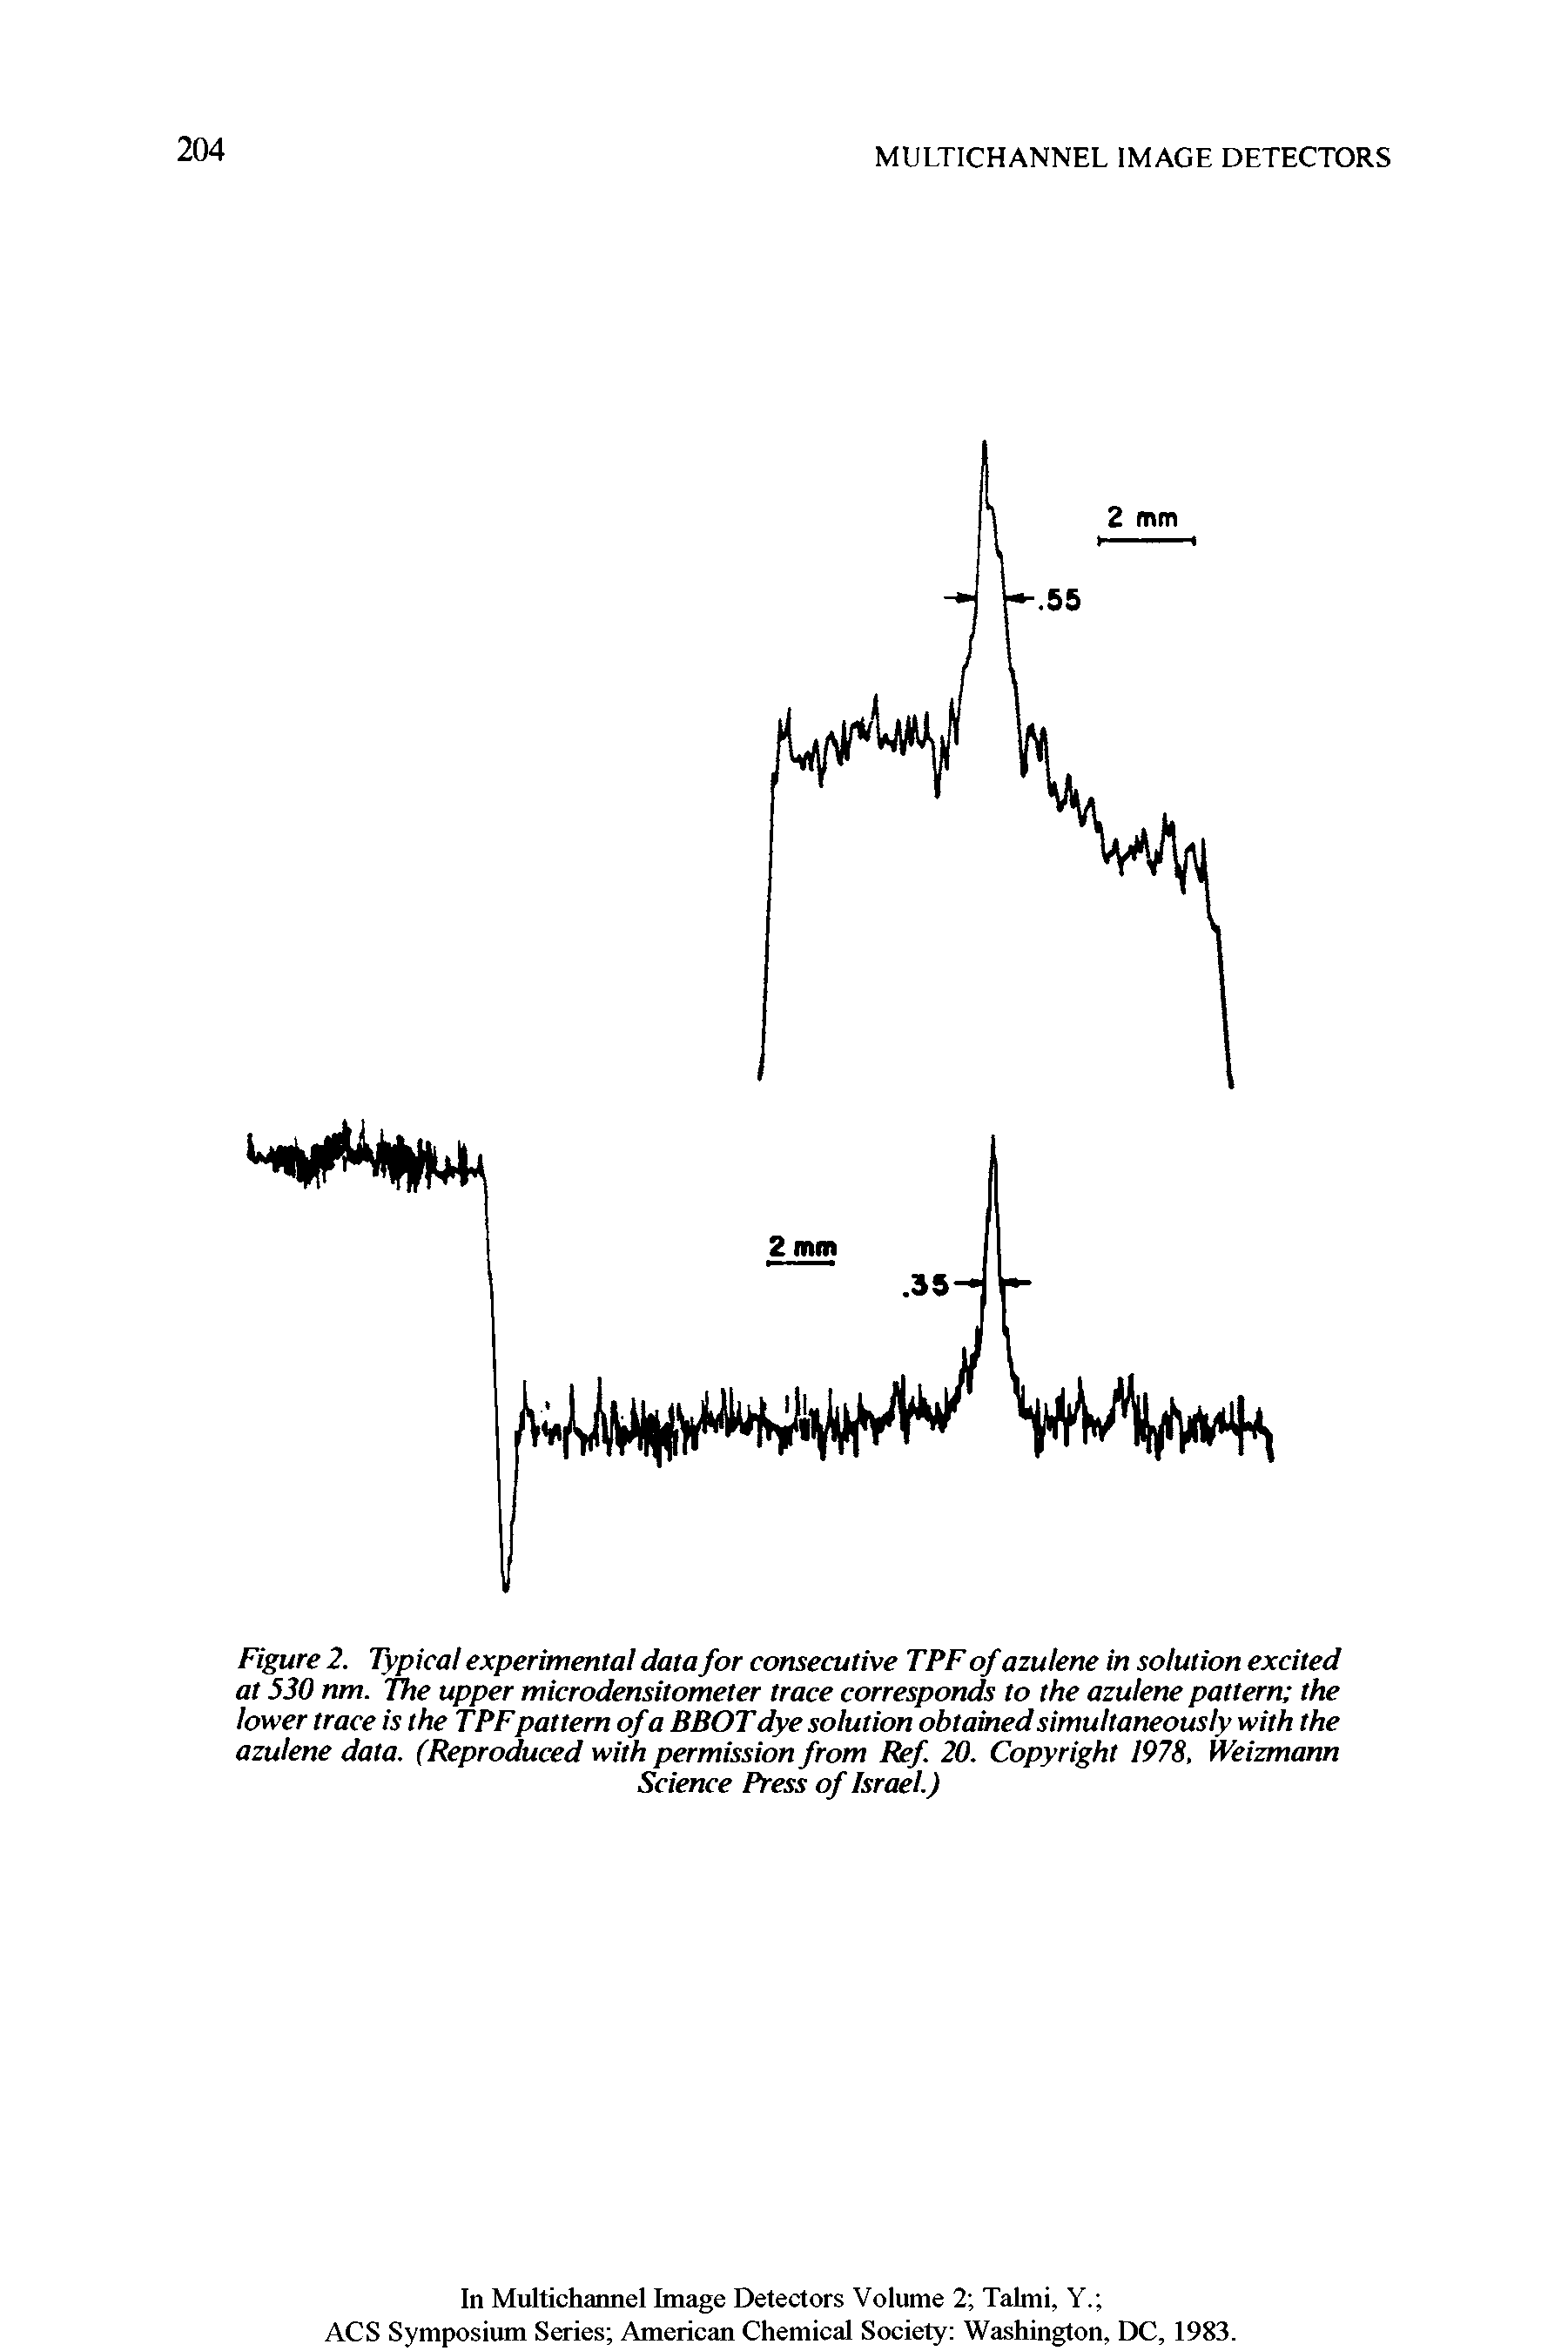 Figure 2. Typical experimental data for consecutive TPFof azulene in solution excited at 530 nm. The upper microdensitometer trace corresponds to the azulene pattern the lower trace is the TPFpattern ofa BBOT dye solution obtained simultaneously with the azulene data. (Reproduced with permission from Ref 20. Copyright 1978, Weizmann...